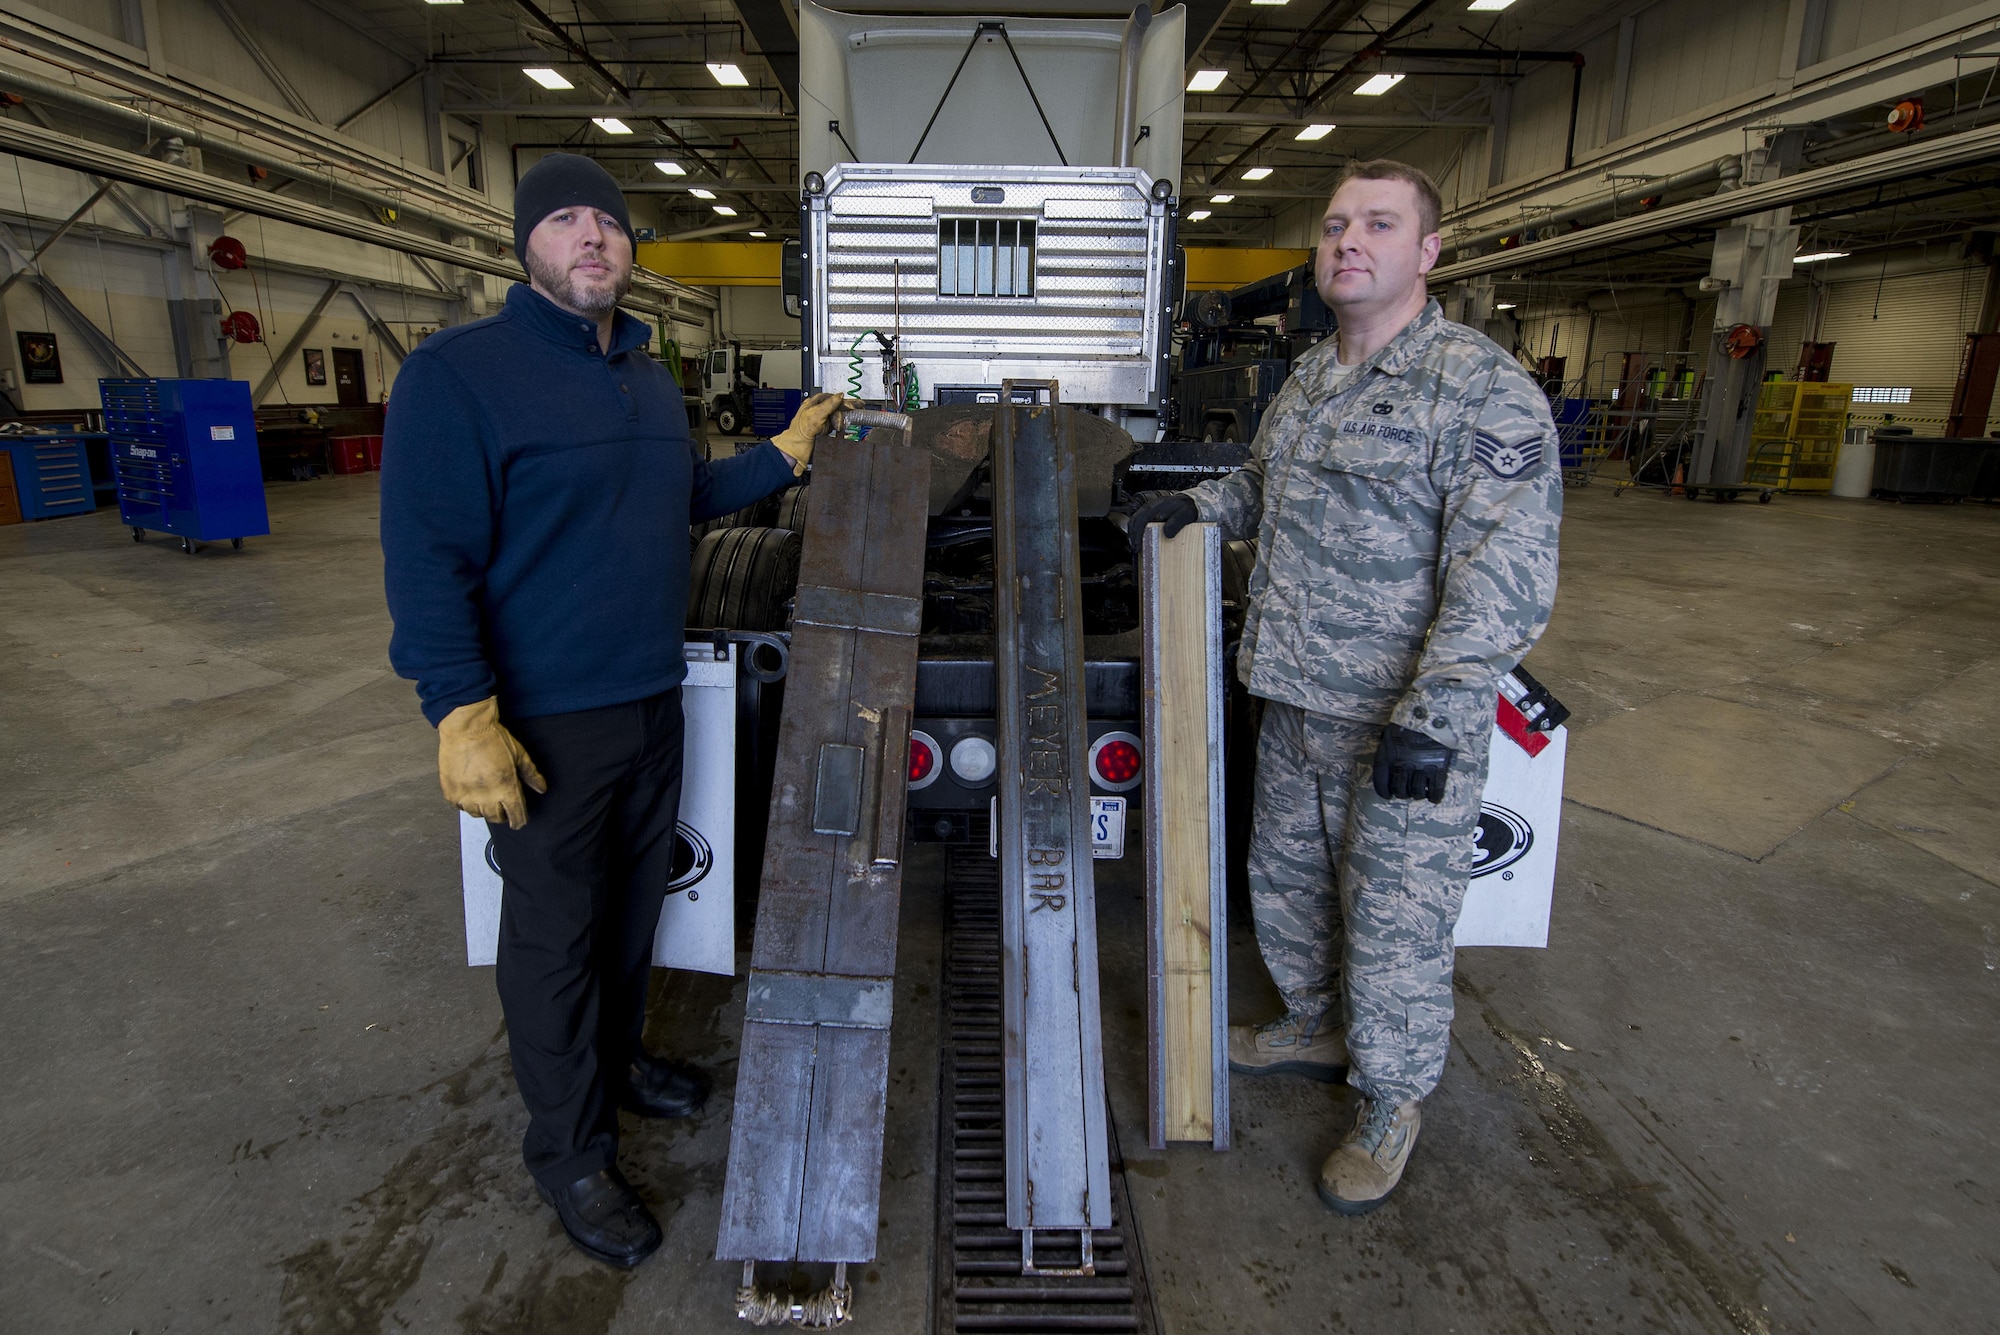 Staff Sgt. Joshua Meyer, 375th Logistics Readiness Squadron vehicle operations control center NCOIC, and Teddy Manning, 375th LRS chief of personal property, show the different iterations of the Meyer’s Bar as it has been continuously being tweaked Jan. 19 at Scott Air Force Base, Ill. The “Meyers Bar 2.0” is a 5-foot reinforced steel bar that has been constructed to support a lowboy trailer’s hydraulic gooseneck hitch to prevent it from bending. (U.S. Air Force photo/Senior Airman Joshua Eikren)